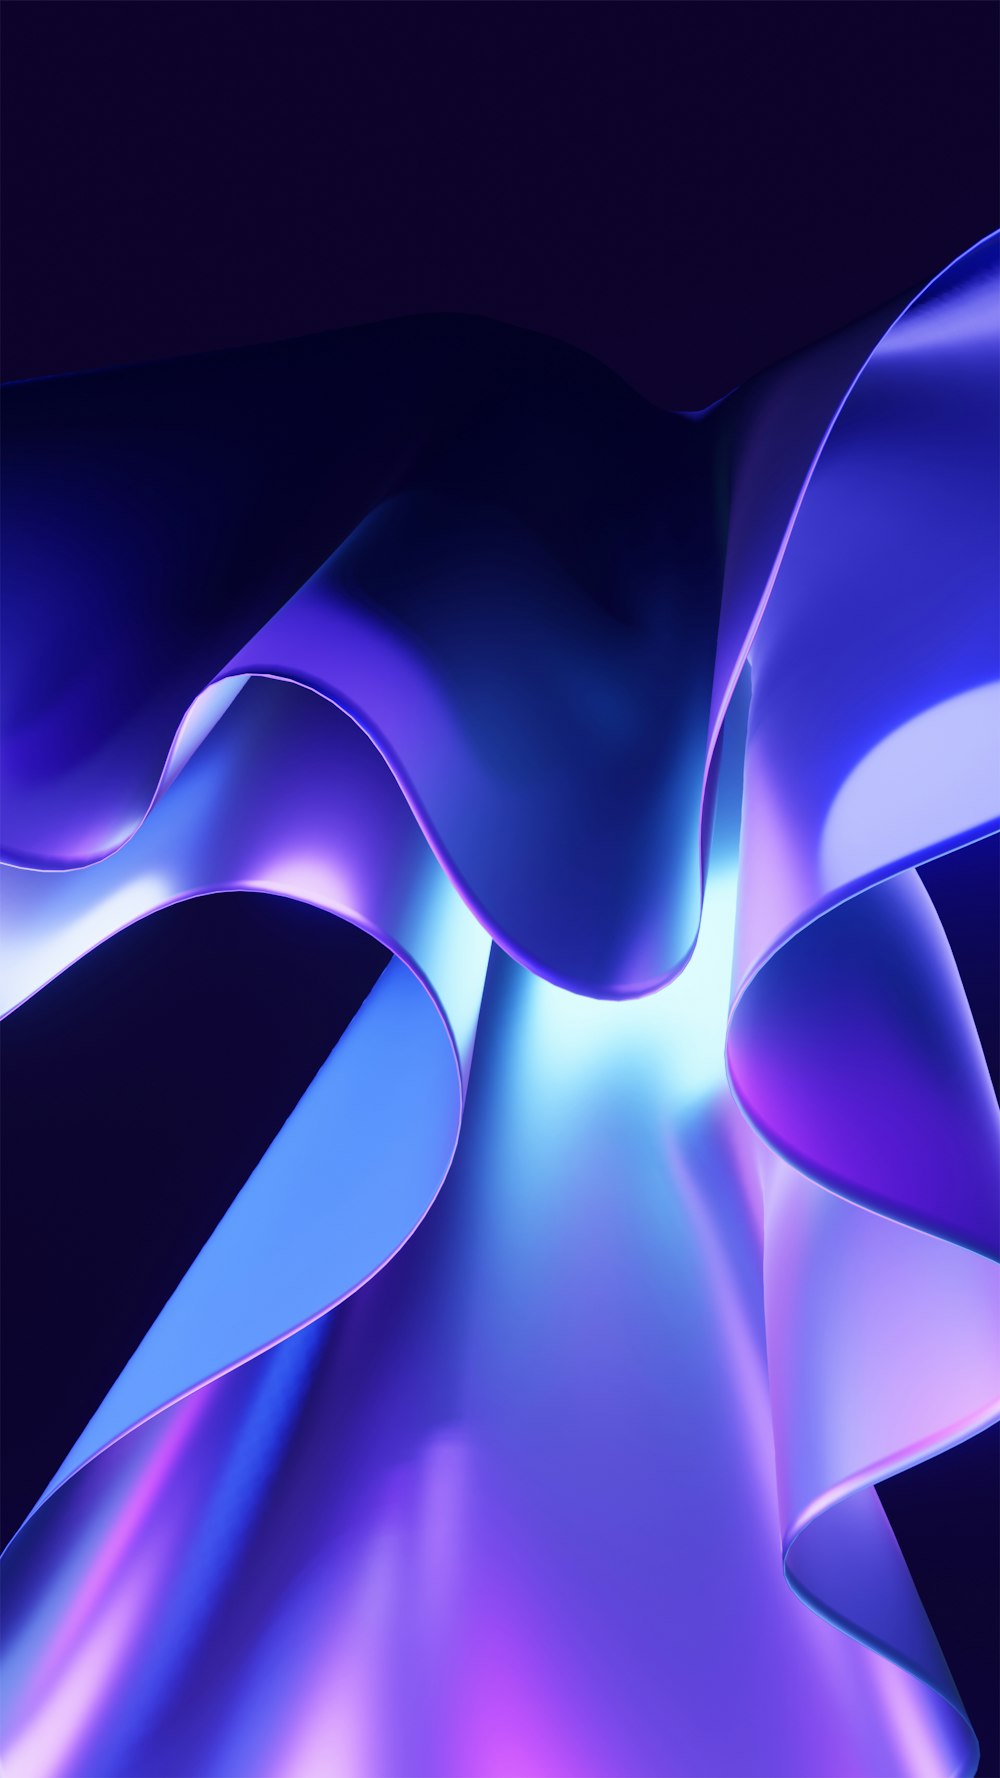 an abstract blue and purple background with wavy lines